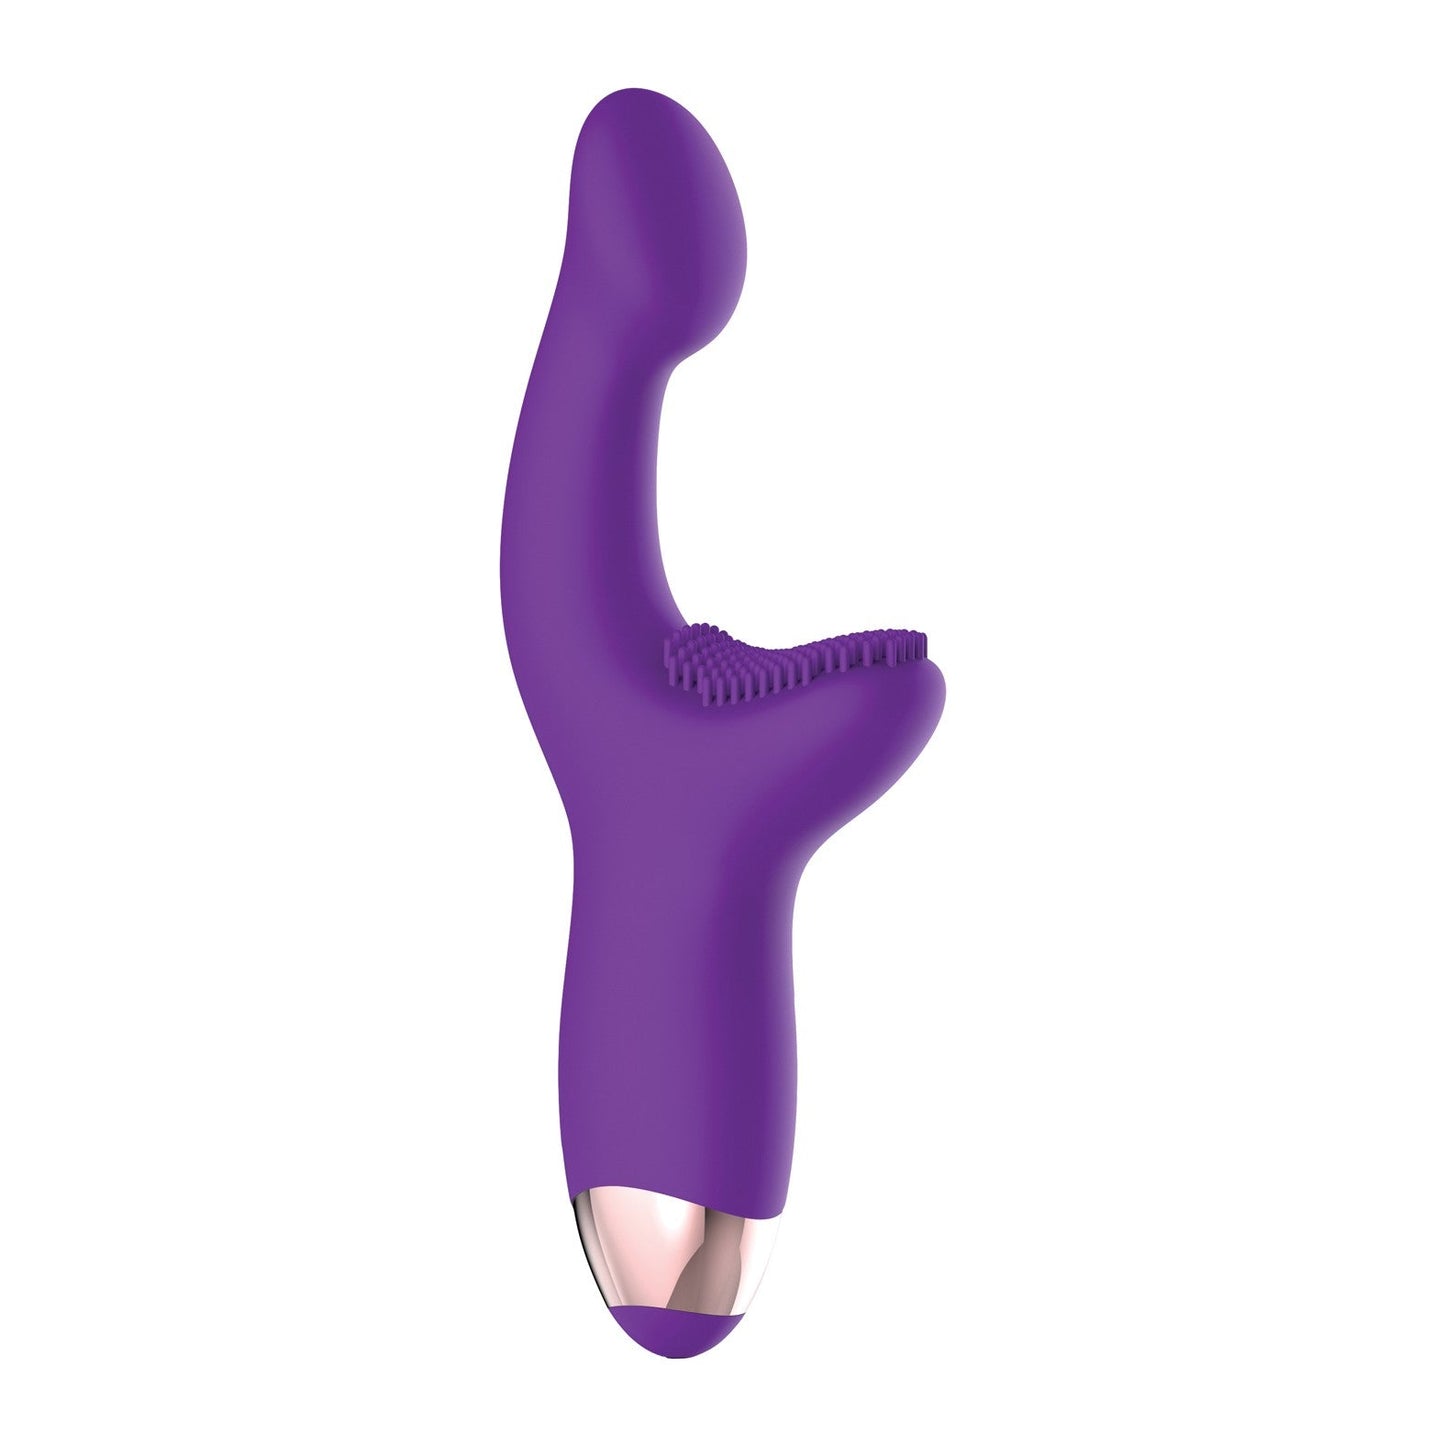 Adam & Eve Silicone G Spot Pleaser Rechargeable Dual Stim G-bliss O-maker - Purple